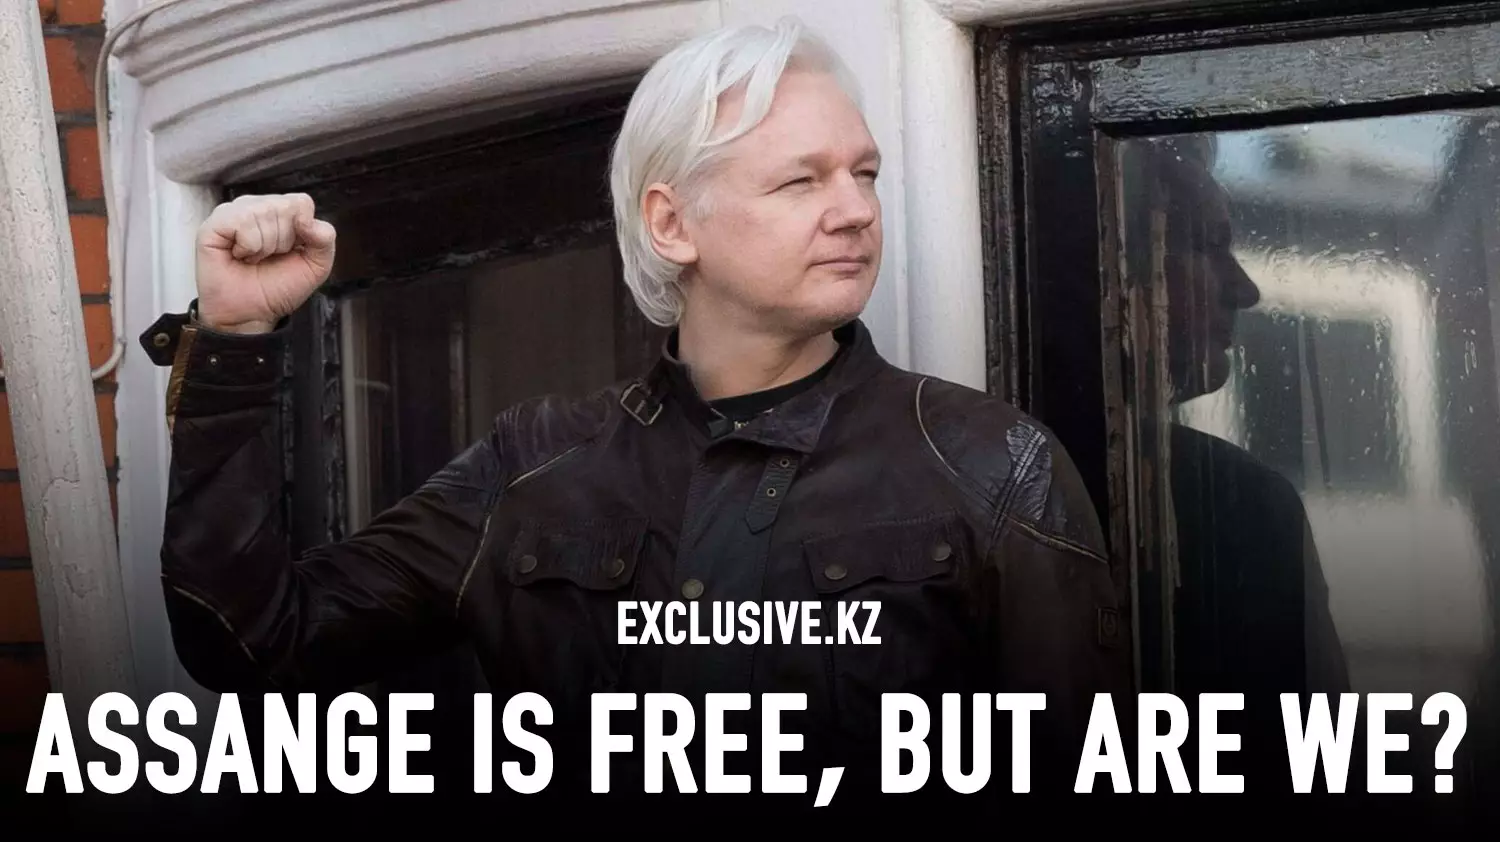 The time has come for others to continue the work Julian Assange started